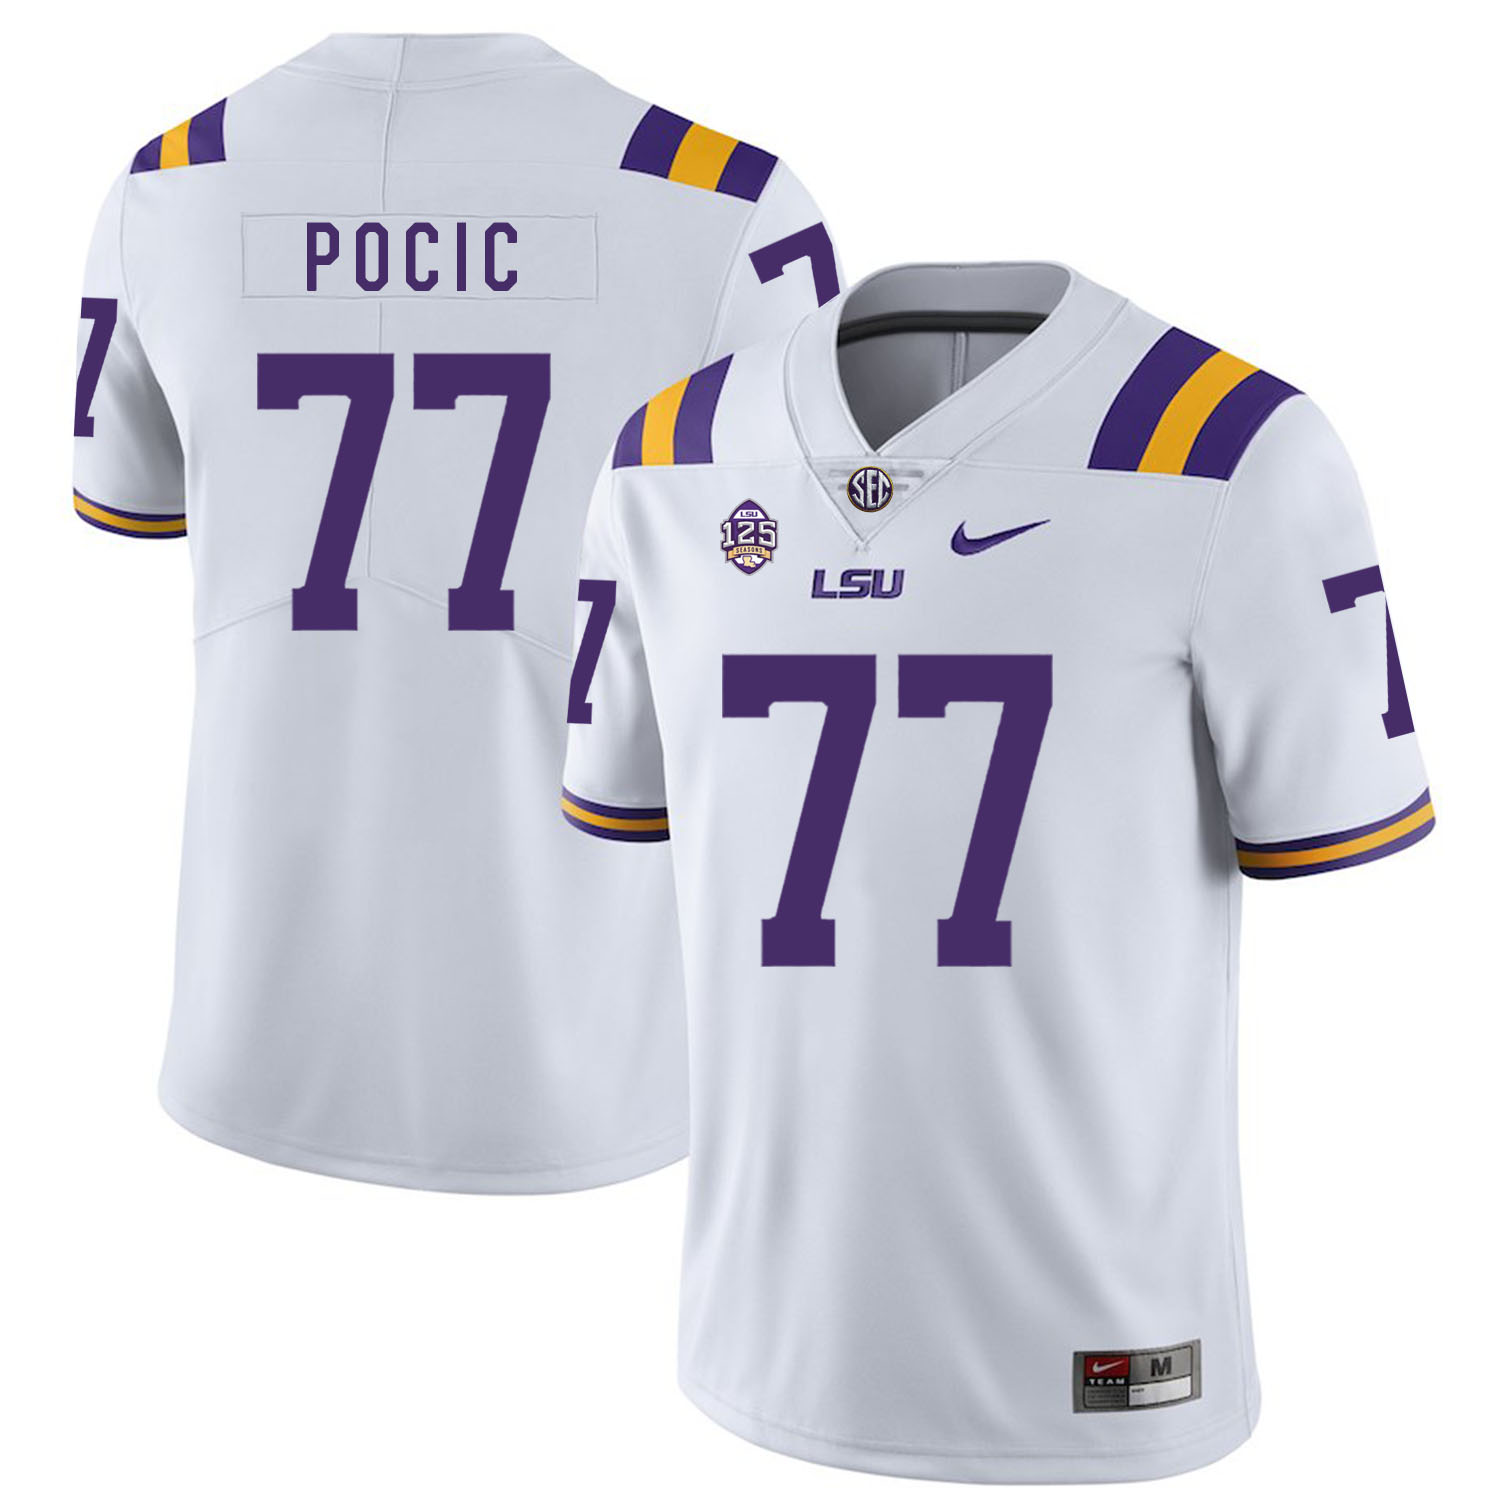 LSU Tigers 77 Ethan Pocic White Nike College Football Jersey